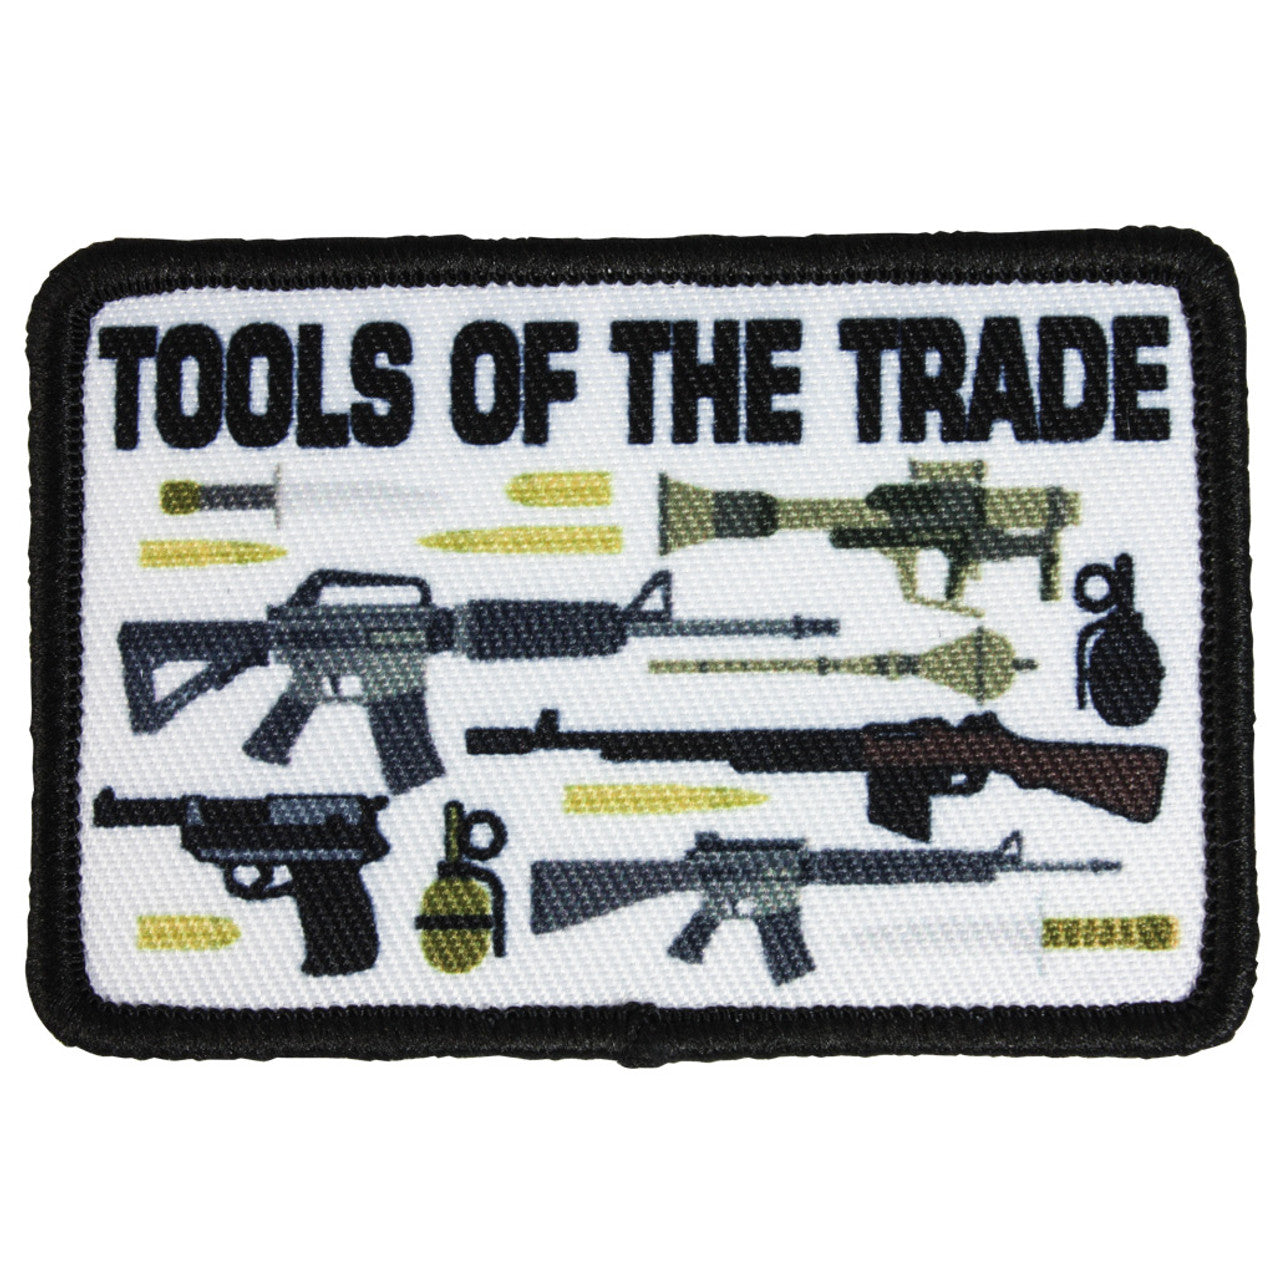 "TOOLS OF THE TRADE" MORALE PATCH